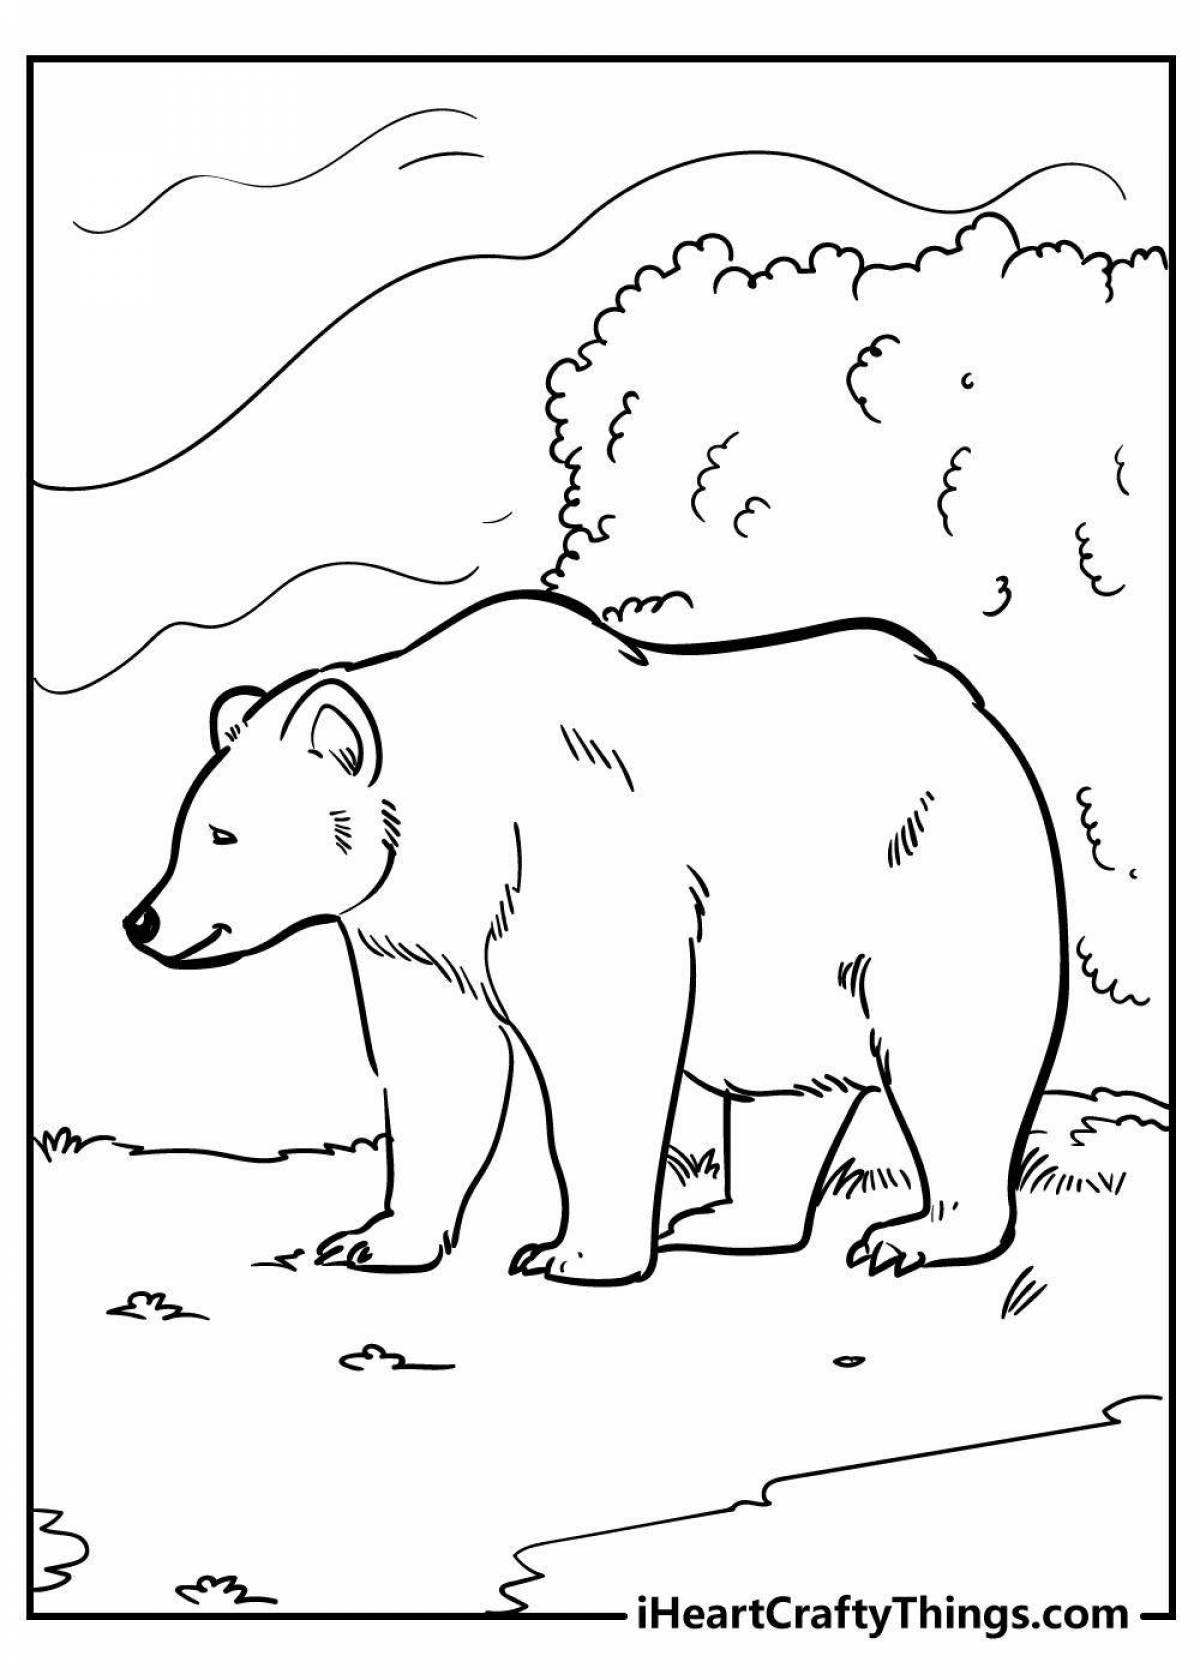 Cute polar bear coloring book for kids 5-6 years old